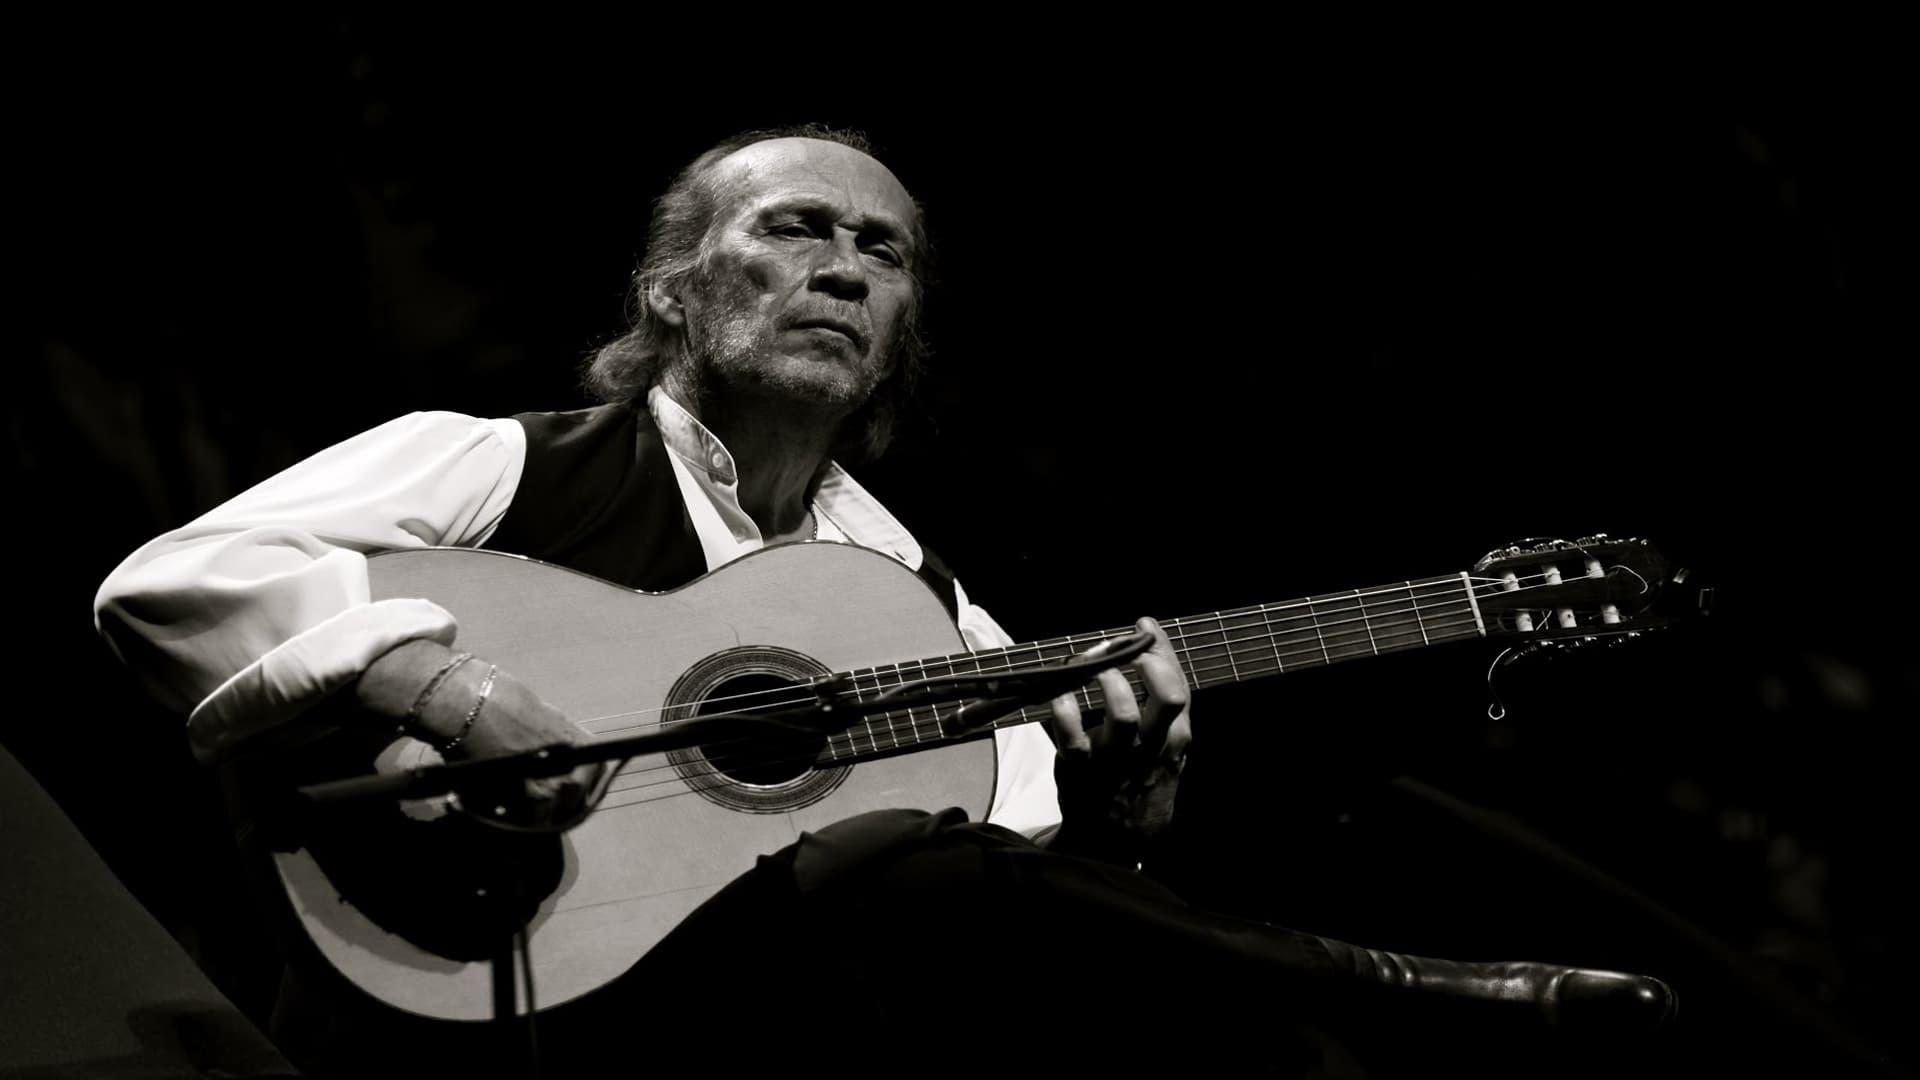 Flight of the Guitar: Dreaming of Paco De Lucia backdrop